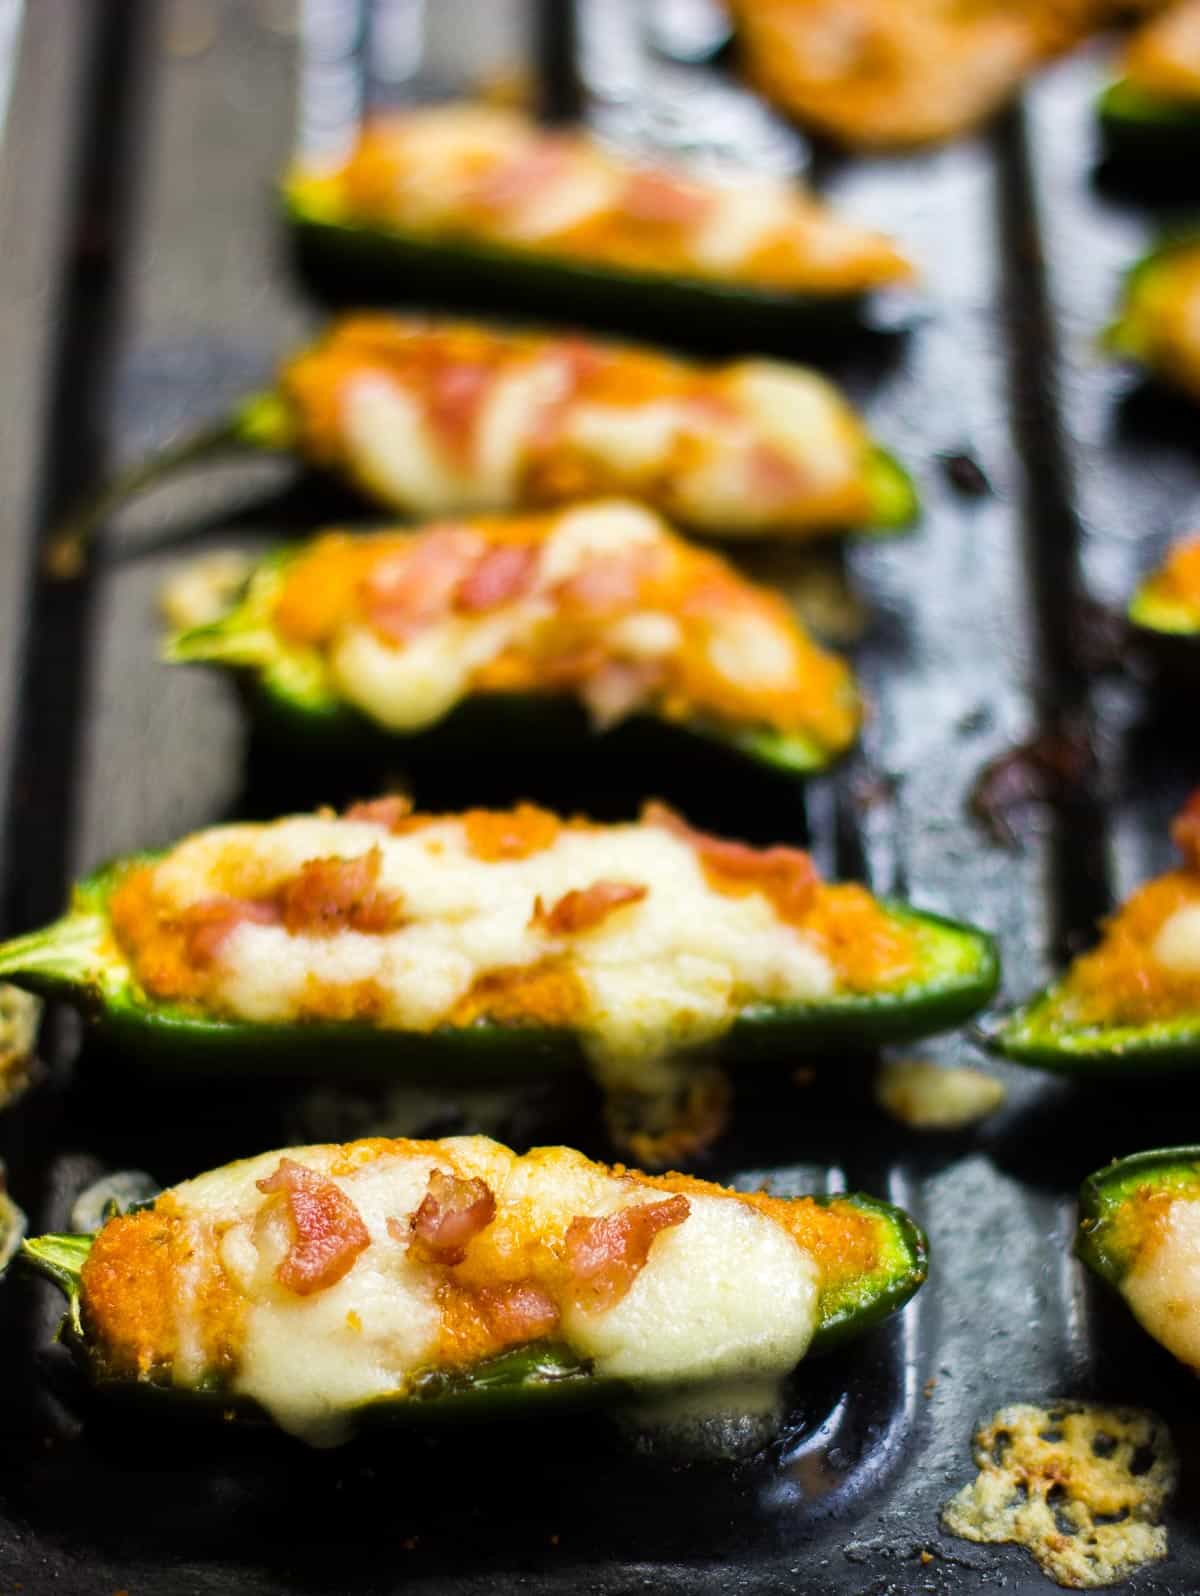 Baked jalapeno poppers fresh out of the oven.